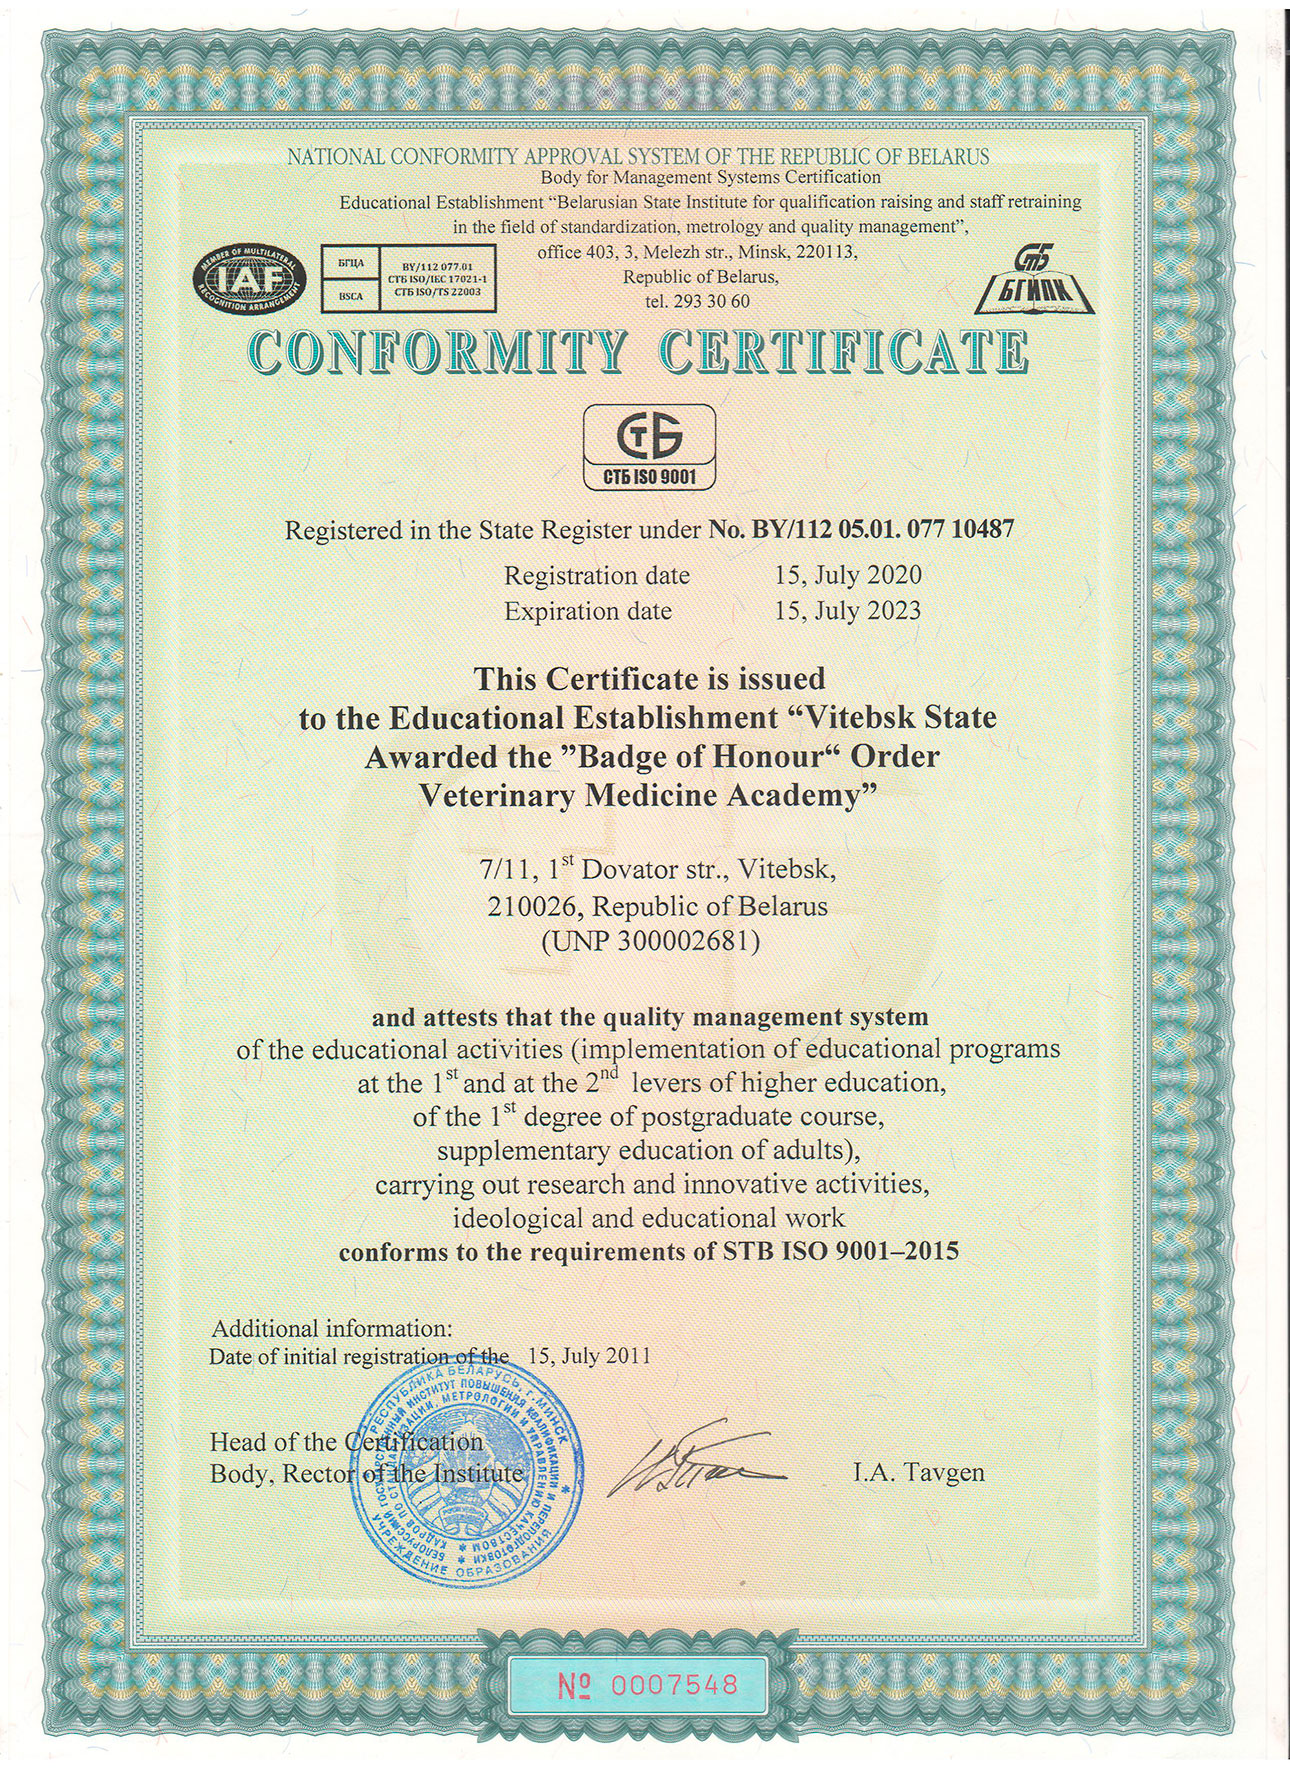 Certificate of conformity ISO 9001. A Certificate of conformity for Glass. Hitachi Certificate of conformity.